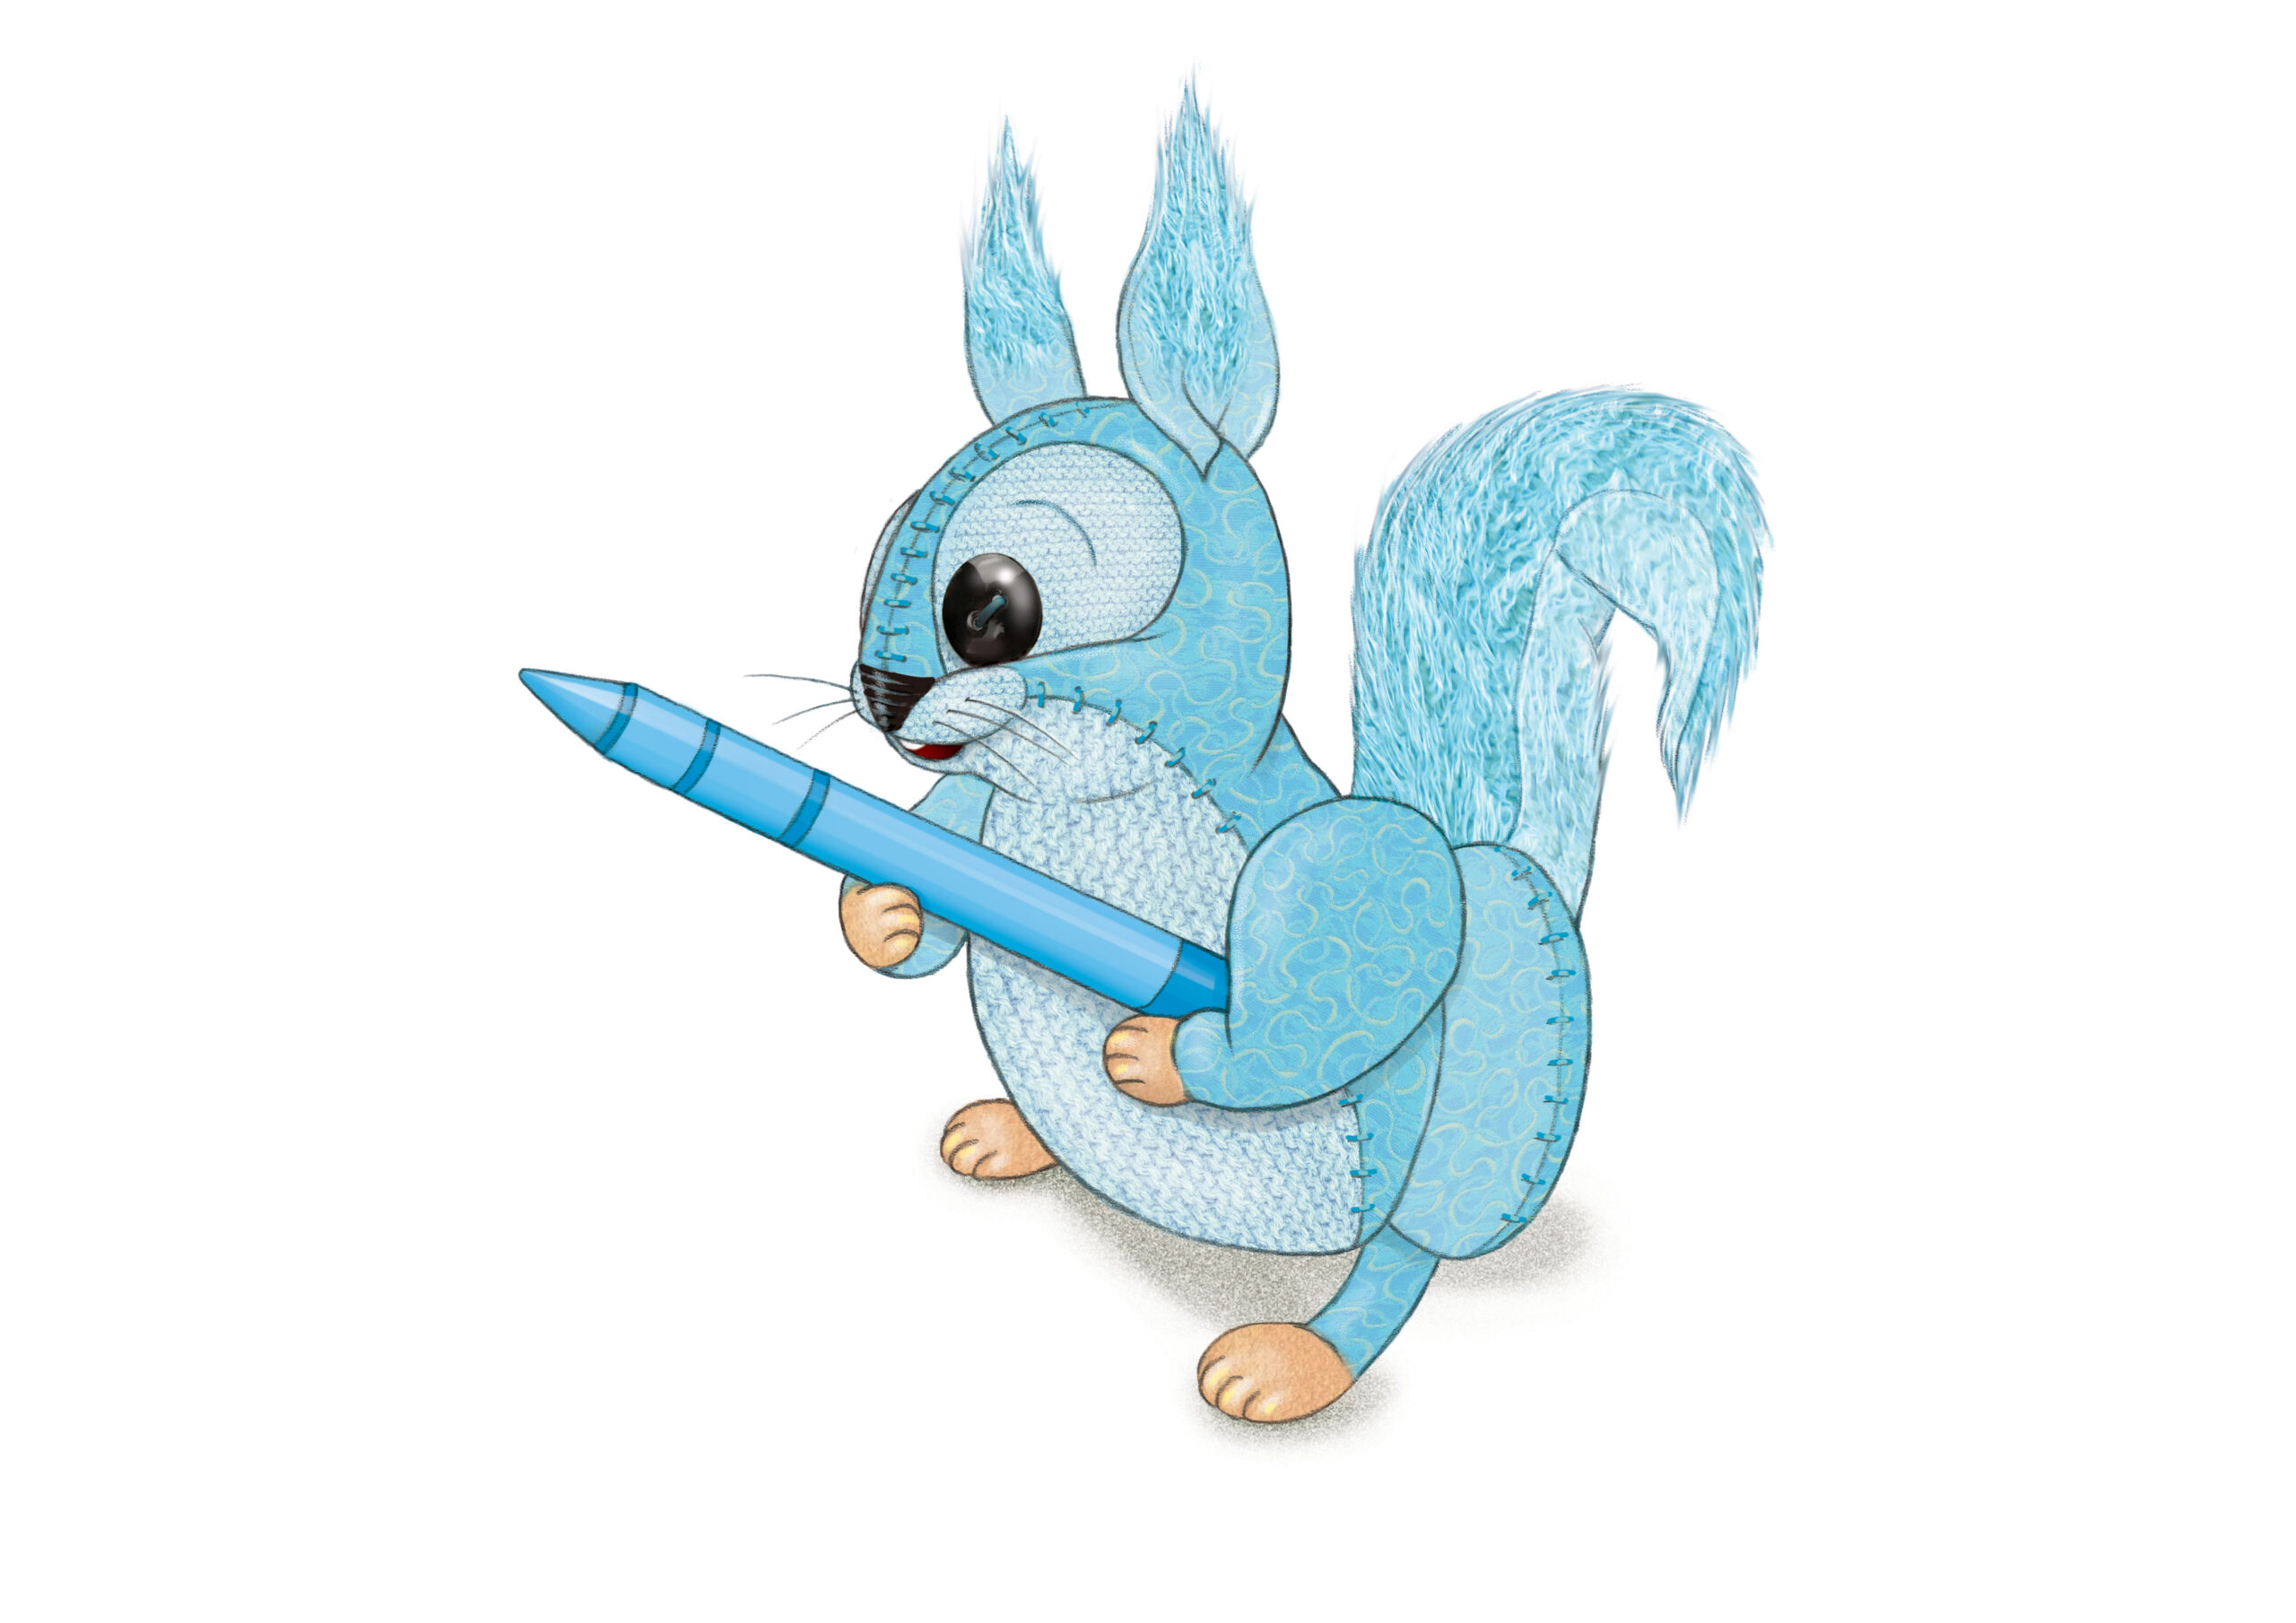 Illustration of a blue stitched soft toy.